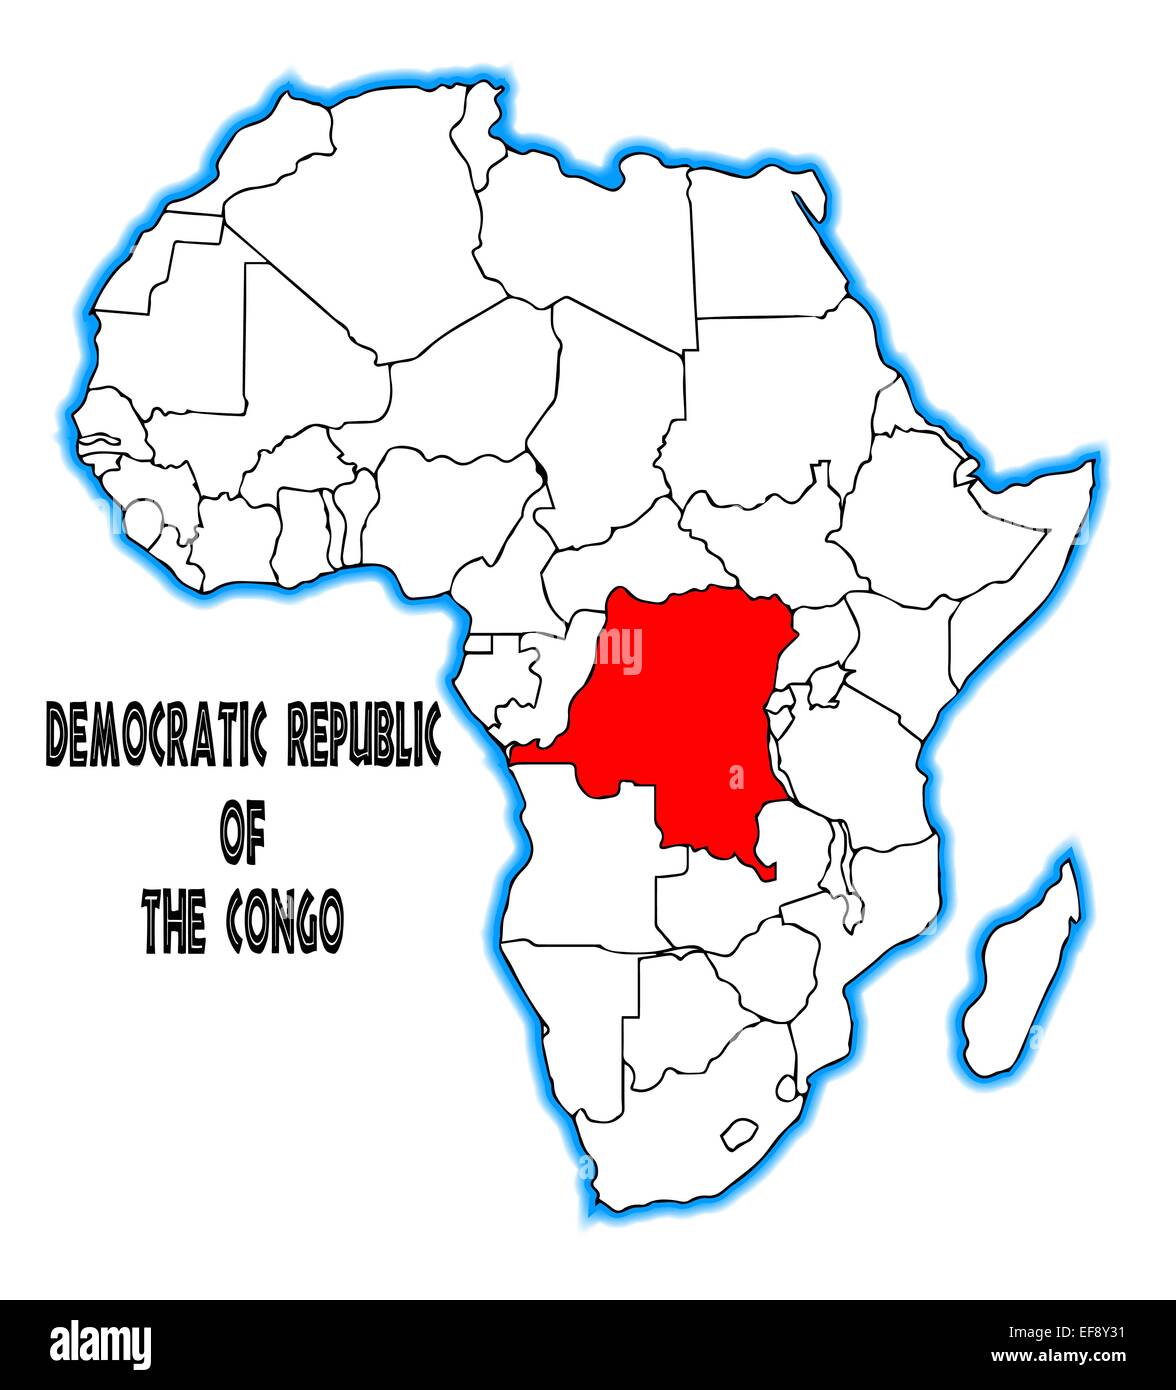 Democratic Republic Of The Congo Outline Inset Into A Map Of Africa EF8Y31 